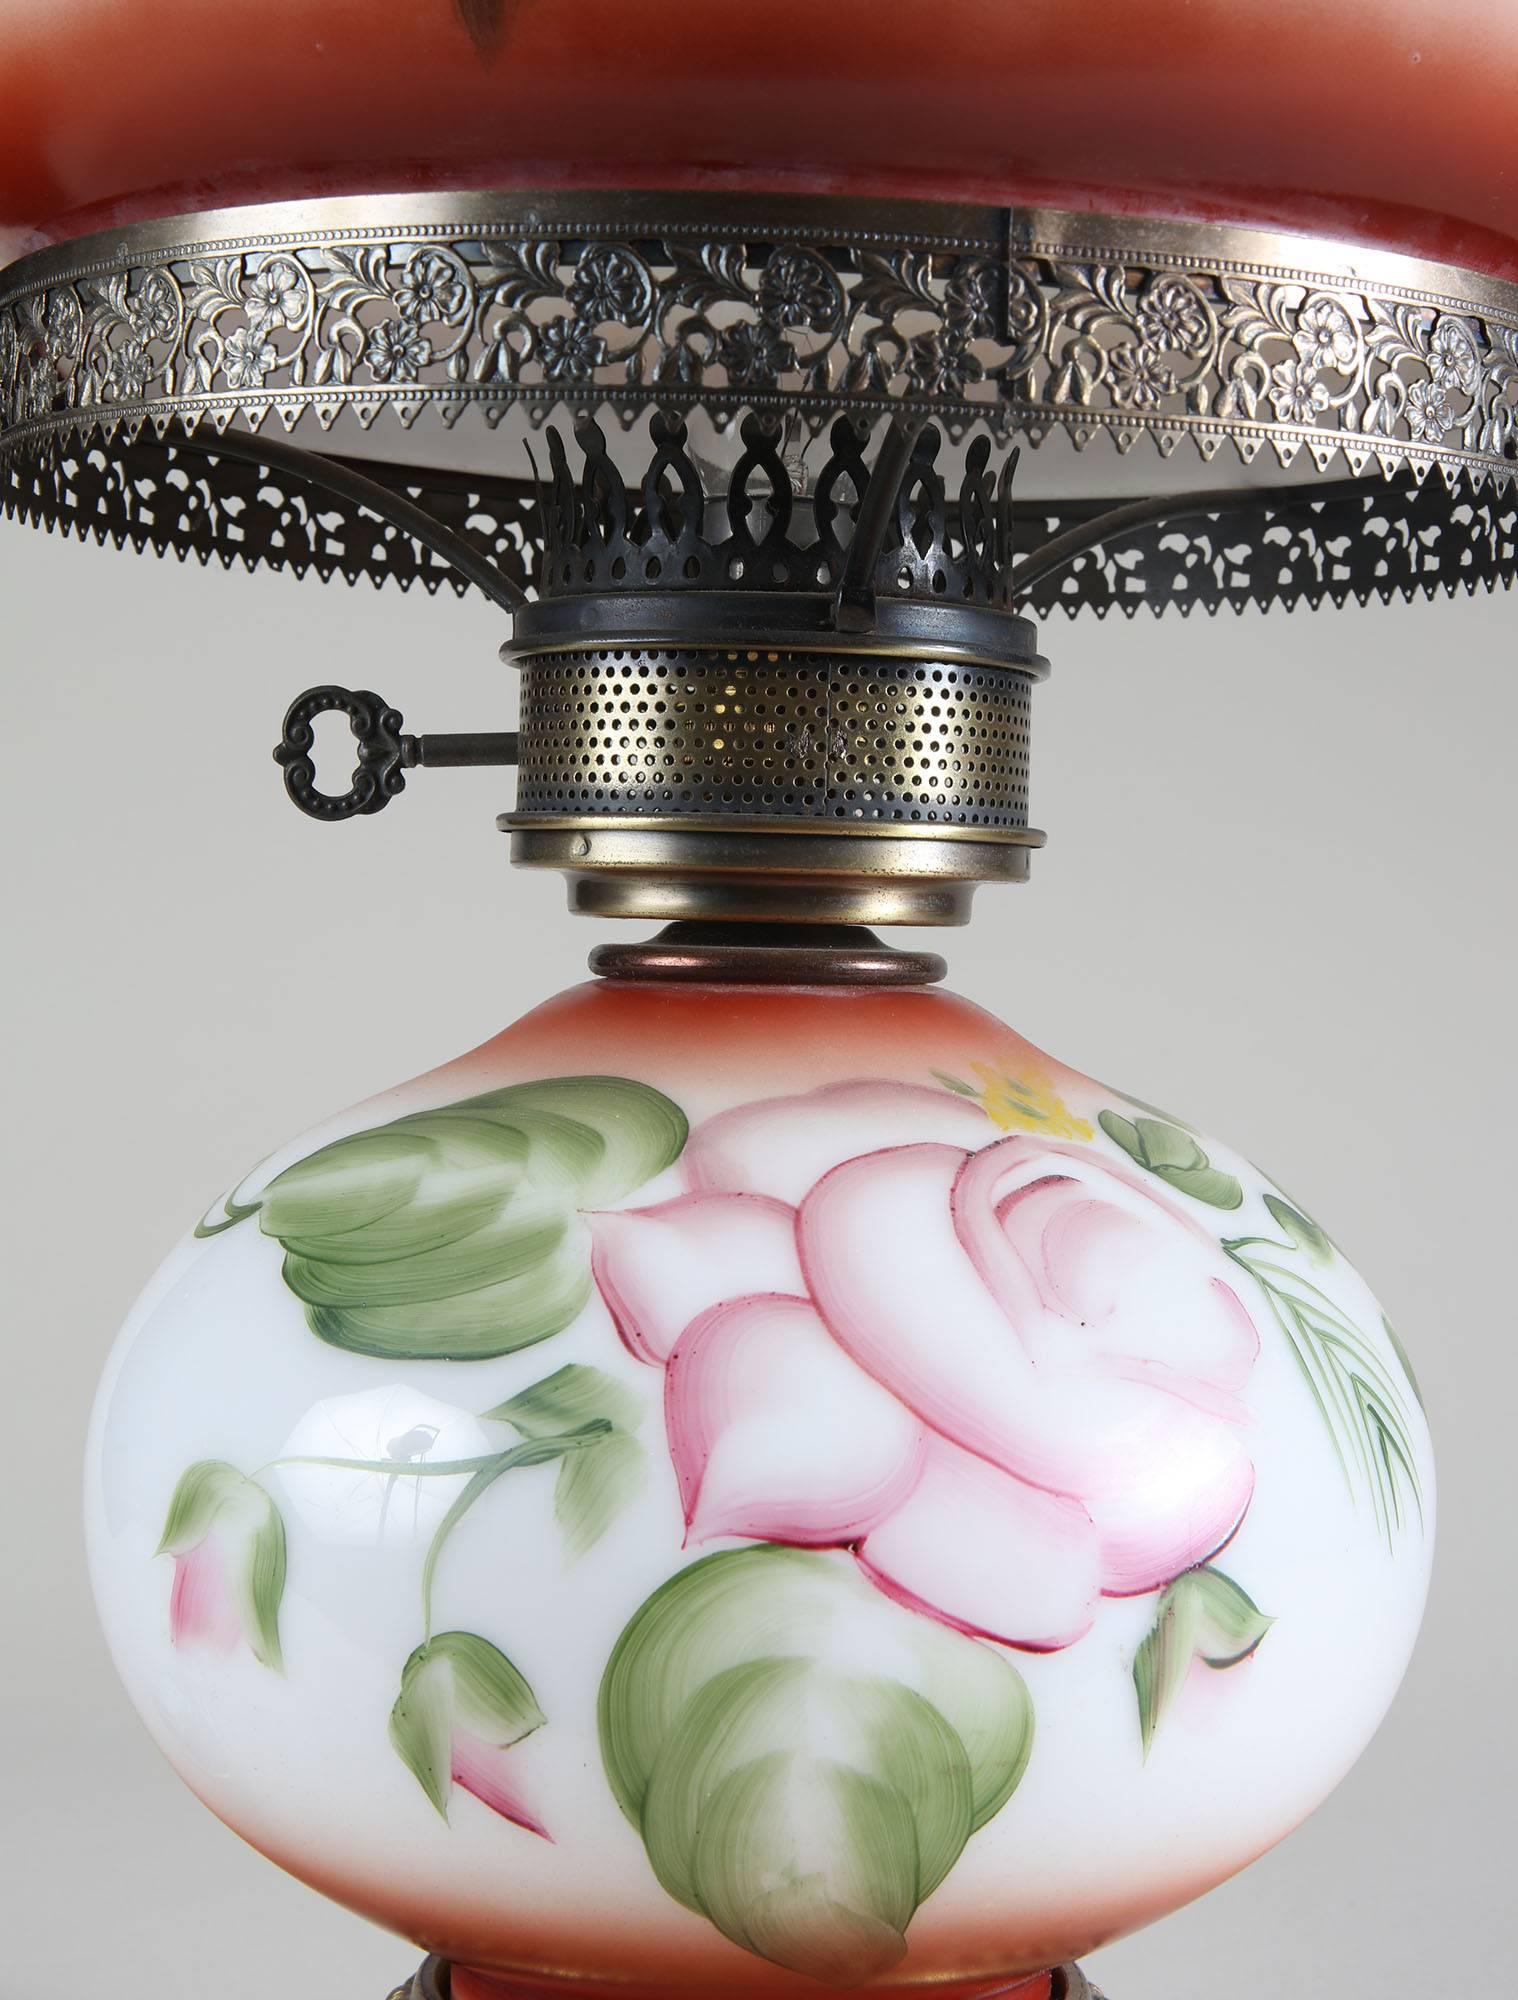 French Opaline Painted Glass Oil Lamp In Excellent Condition In London, by appointment only